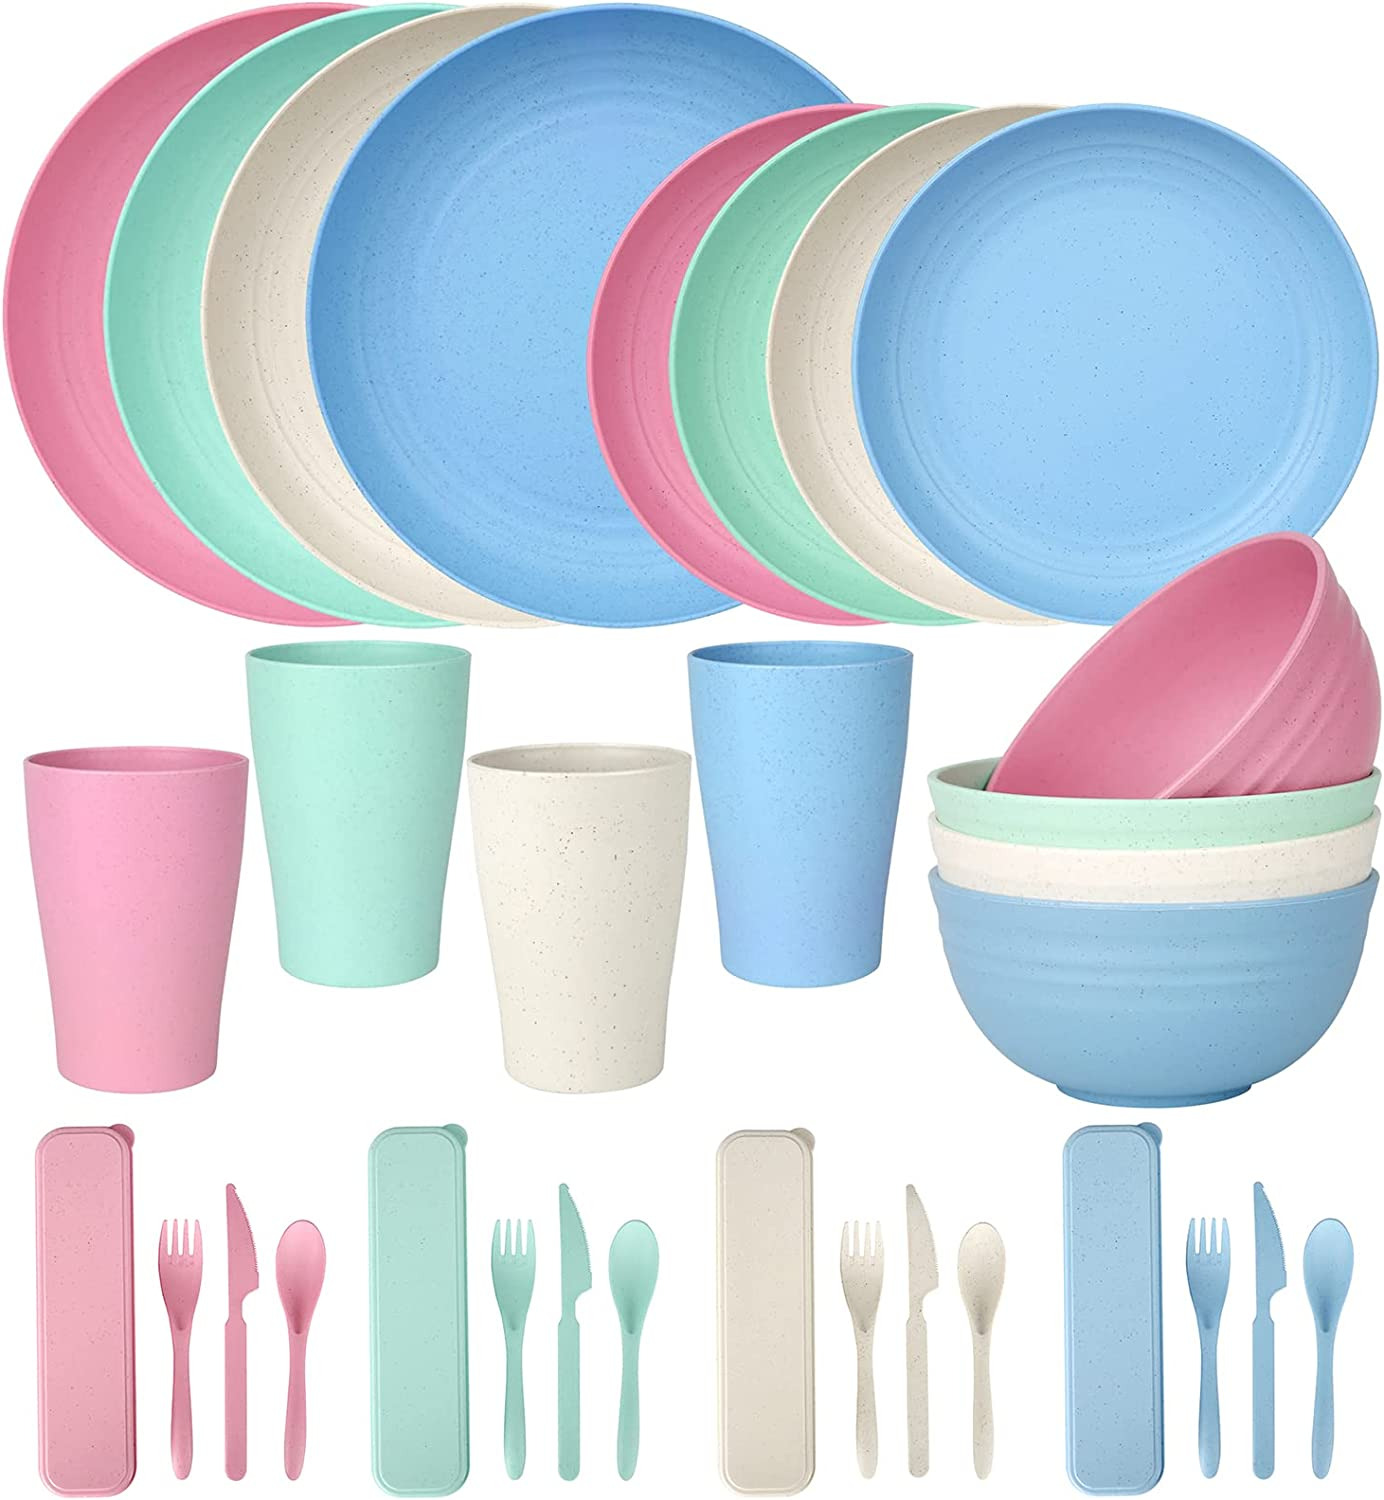 Wheat Straw Dinnerware Sets for 4 Lightweight & Unbreakable Dishes Microwave & D